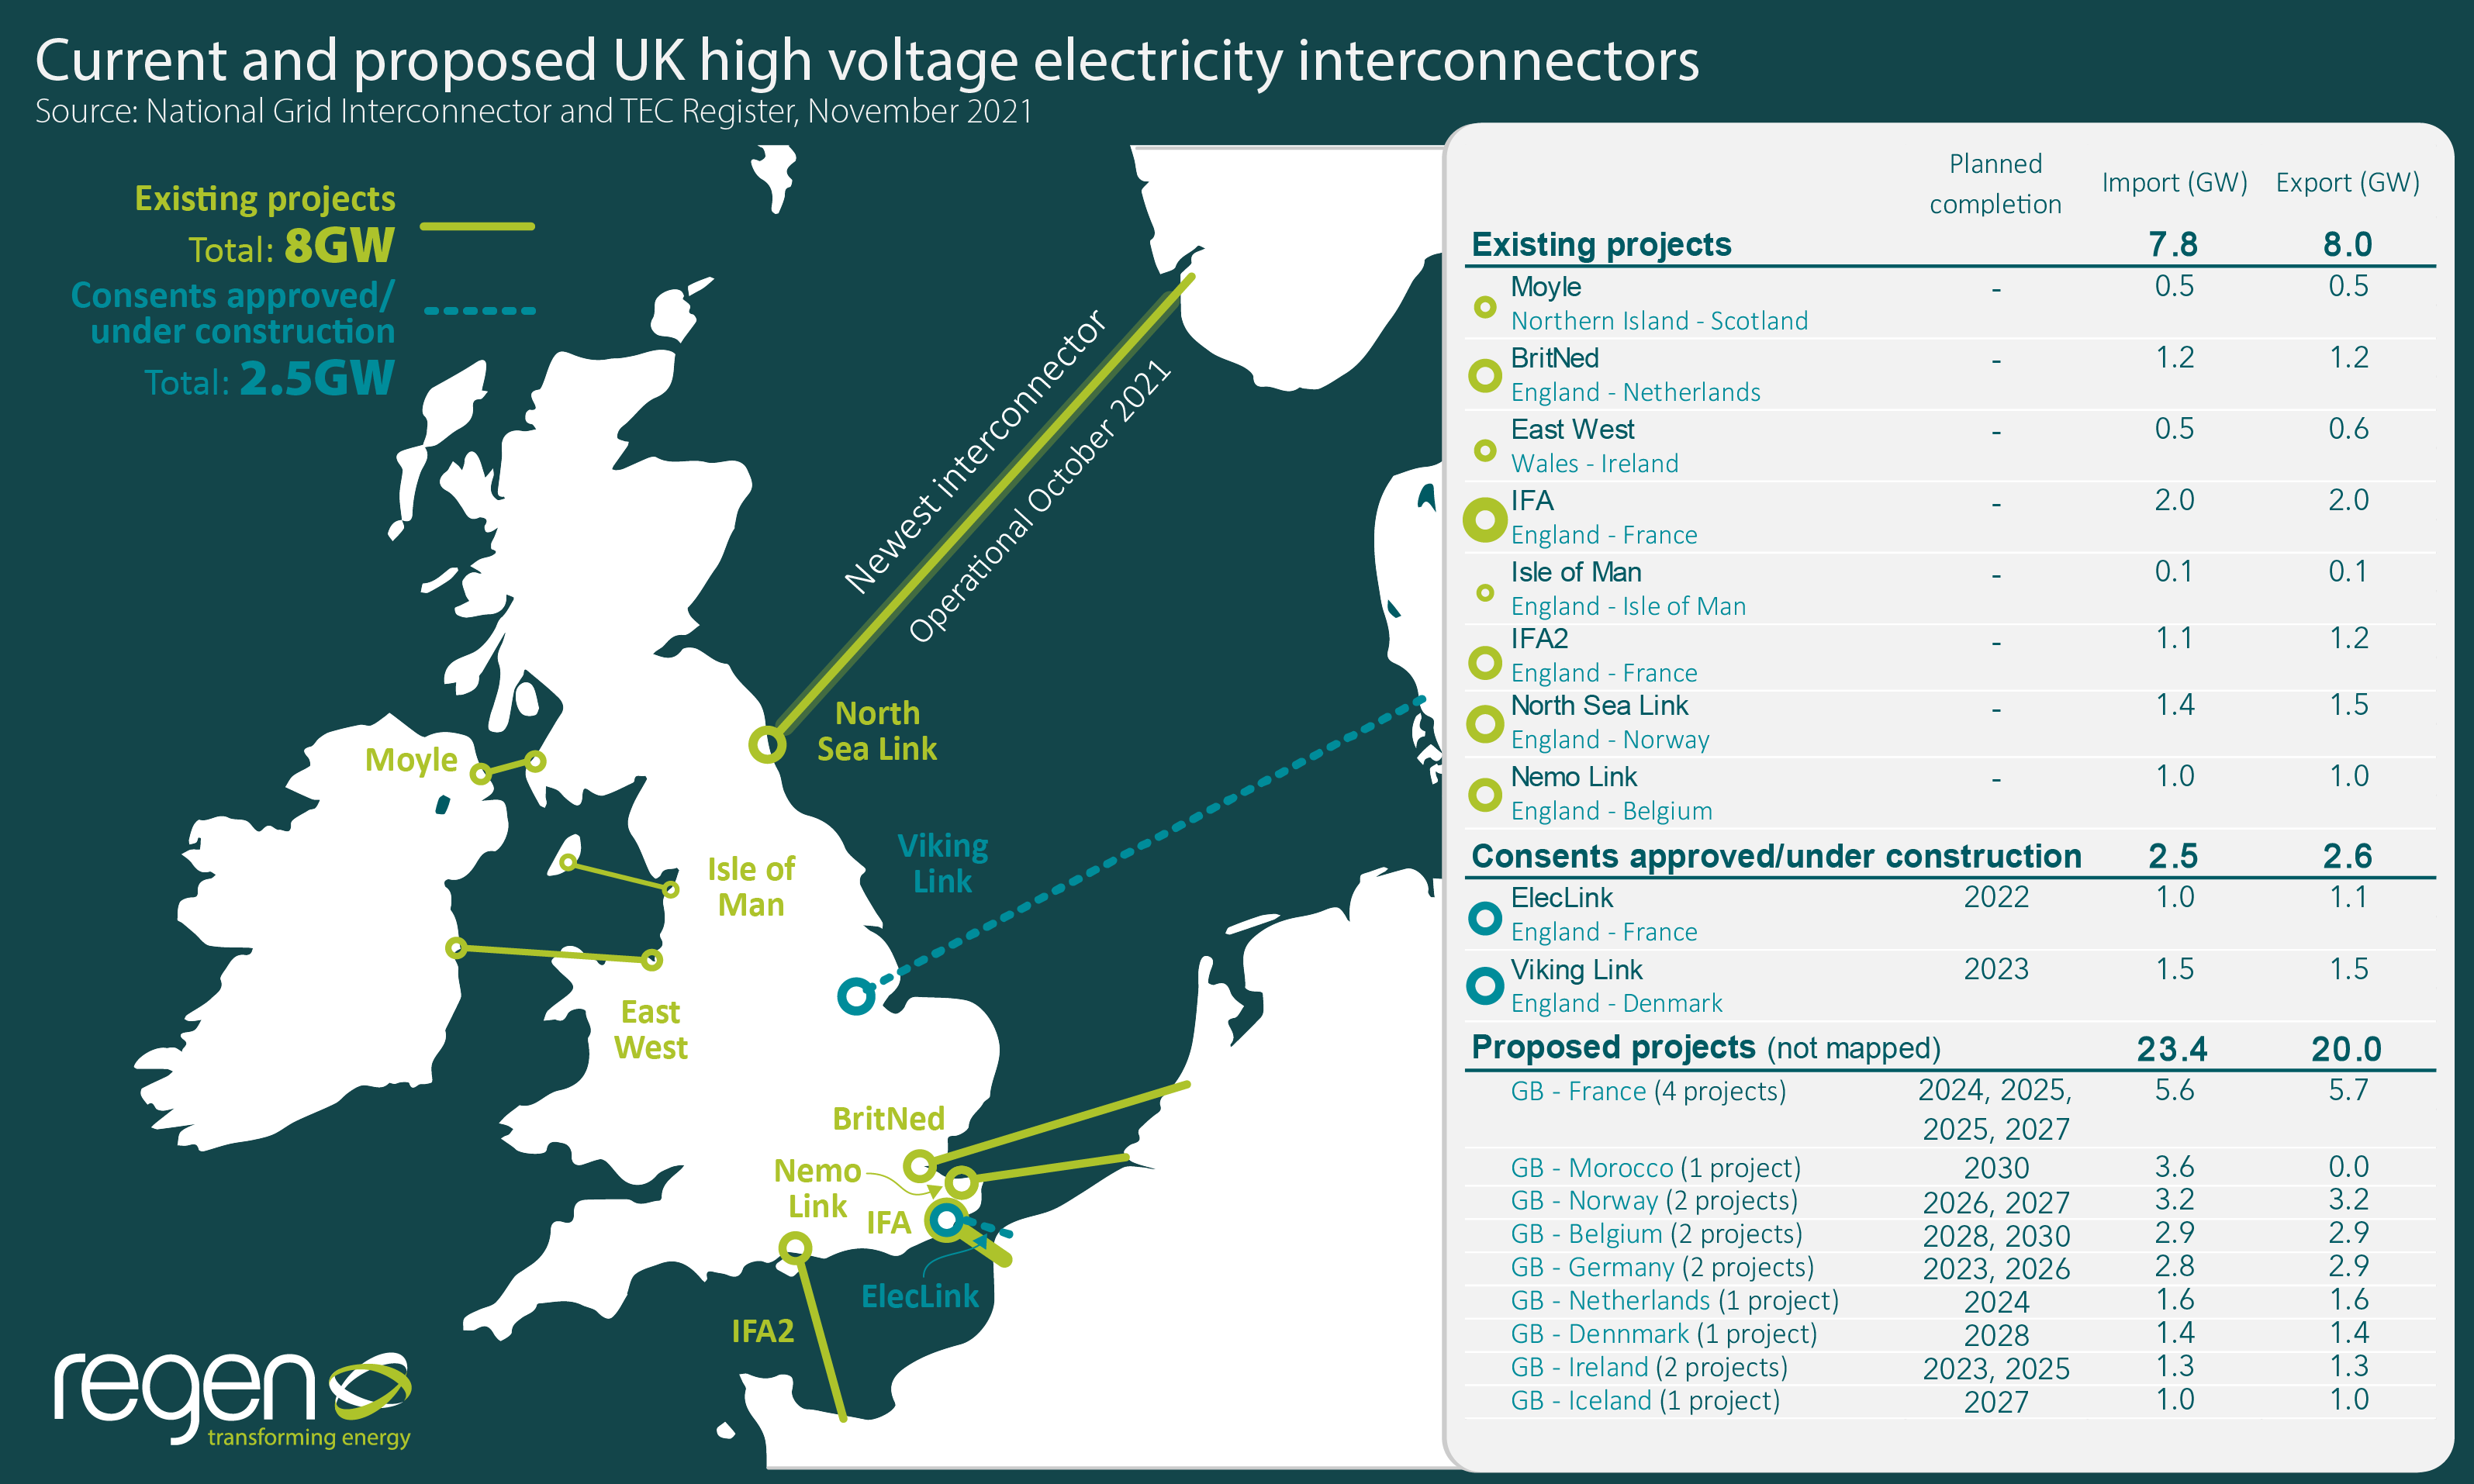 A map of UK high voltage electricity interconnectors